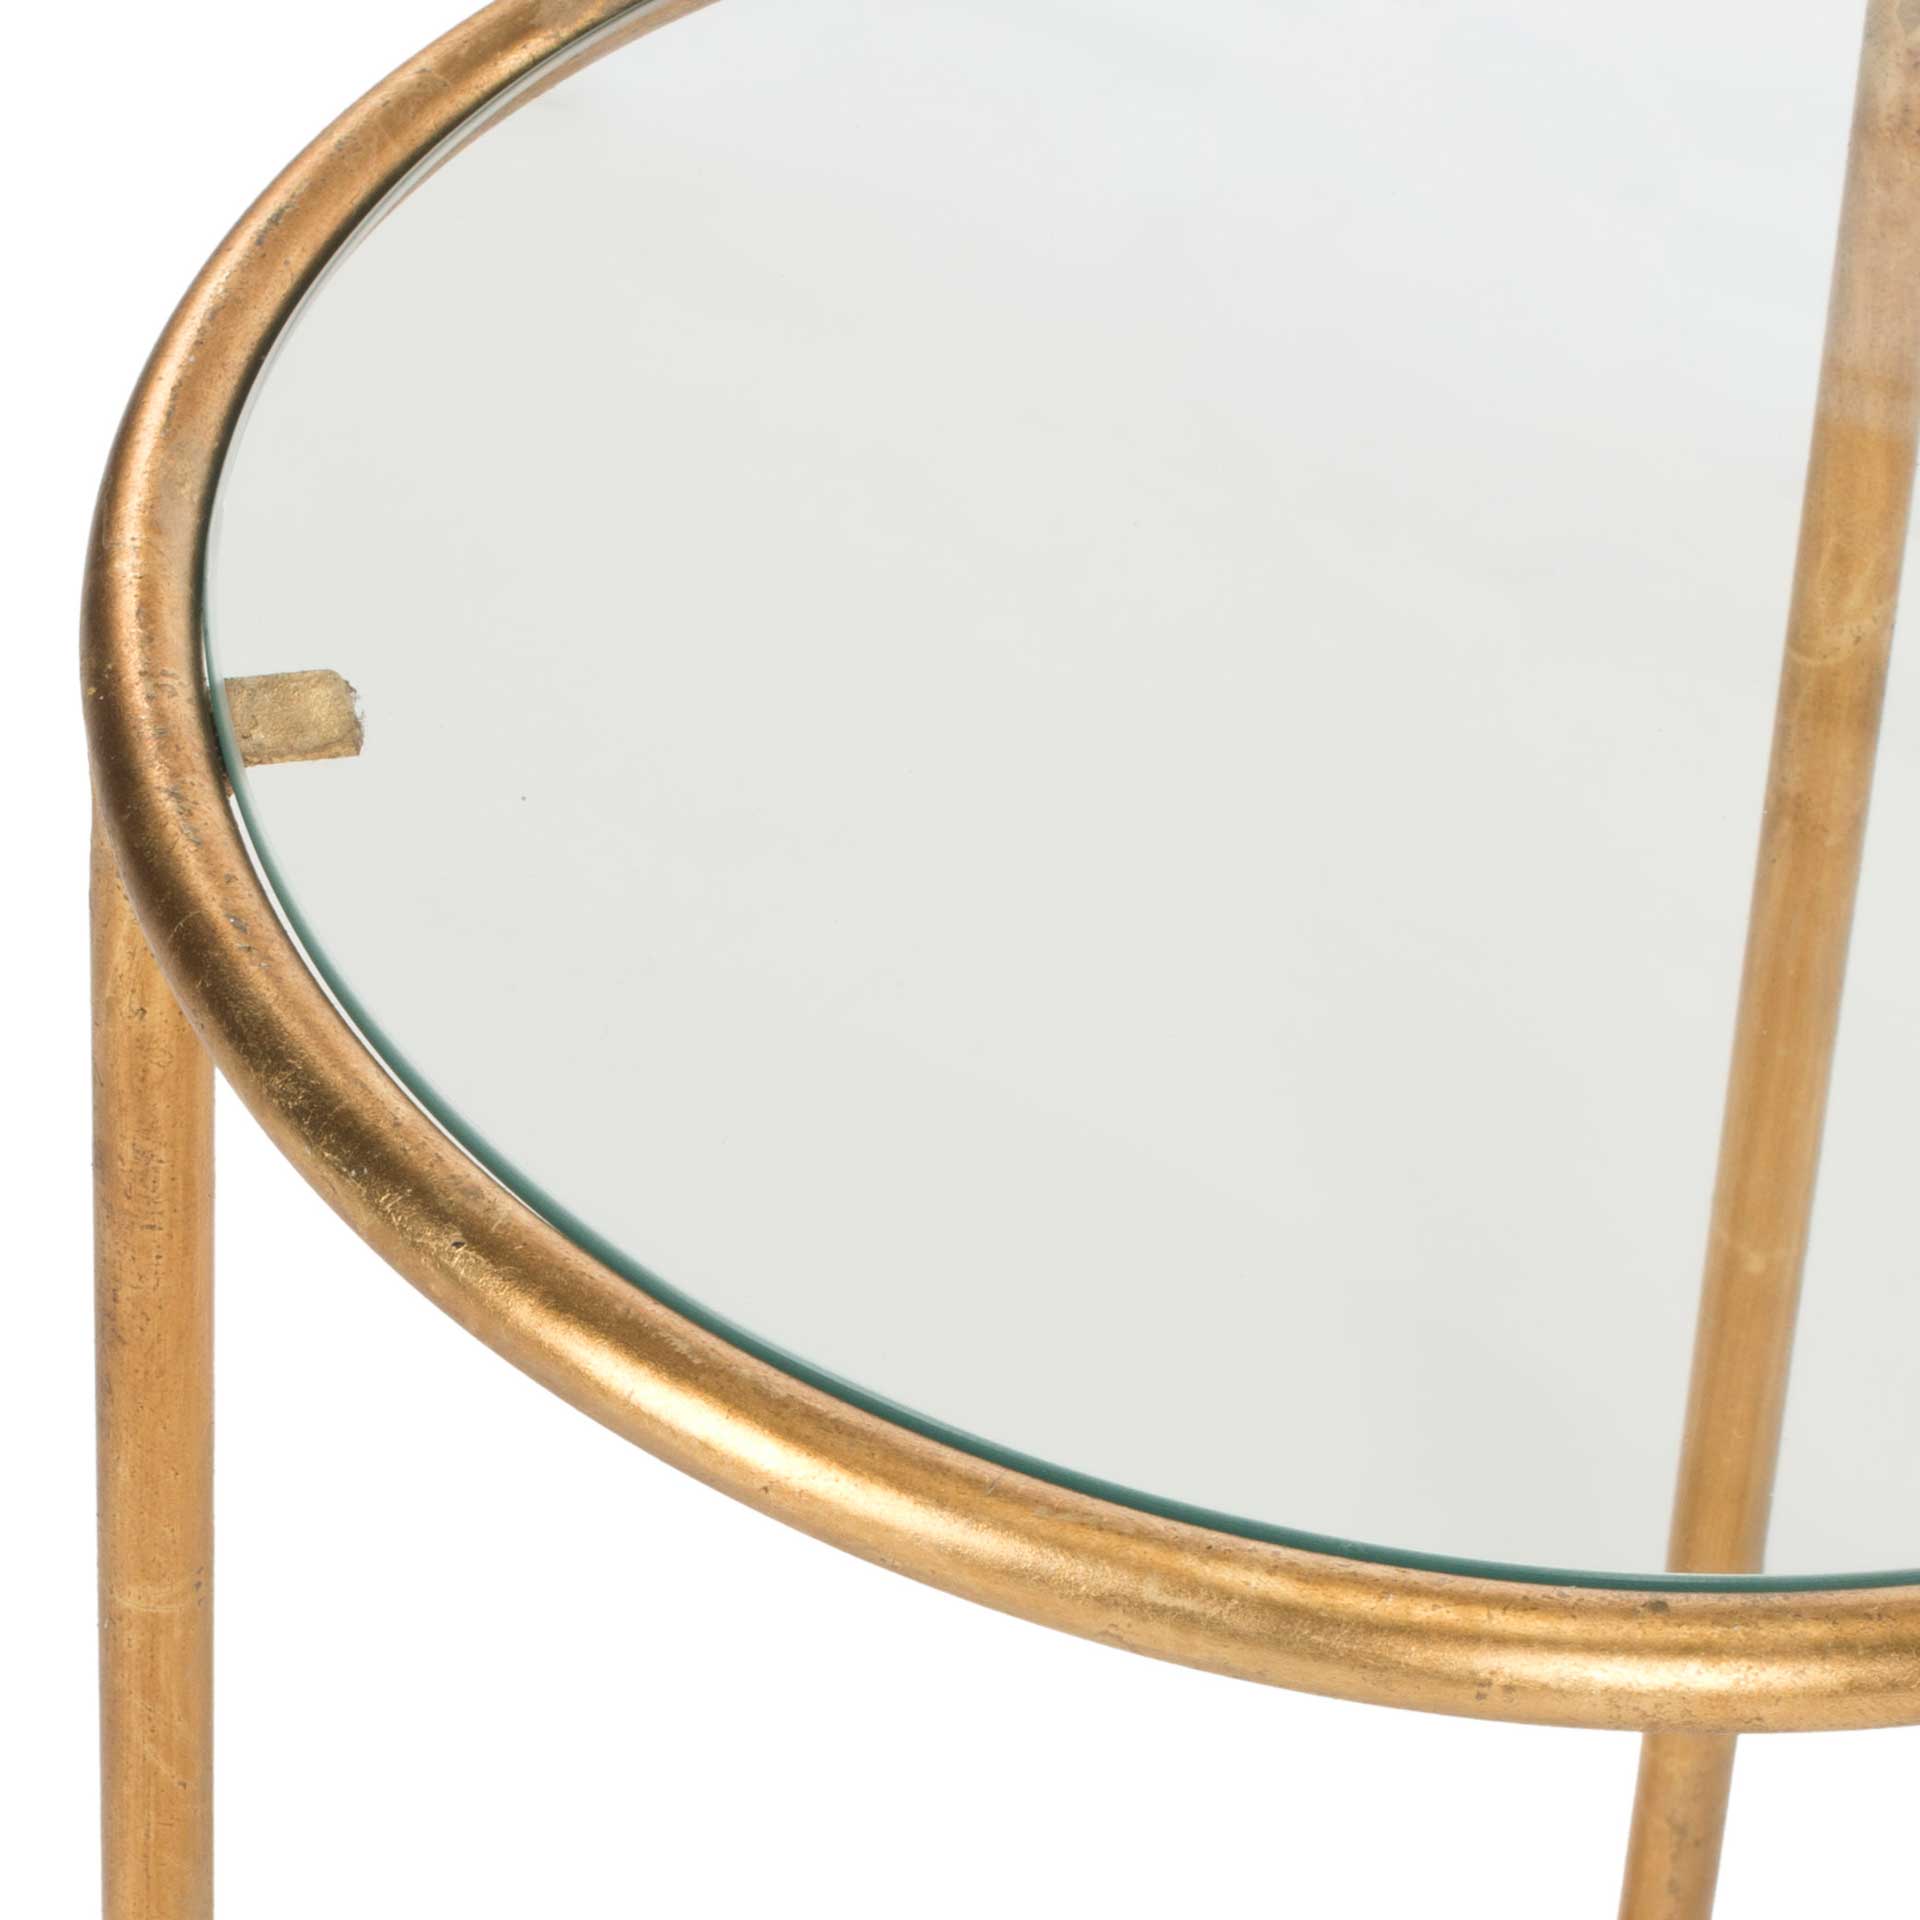 Shaikha Glass Top Accent Table Gold/Clear